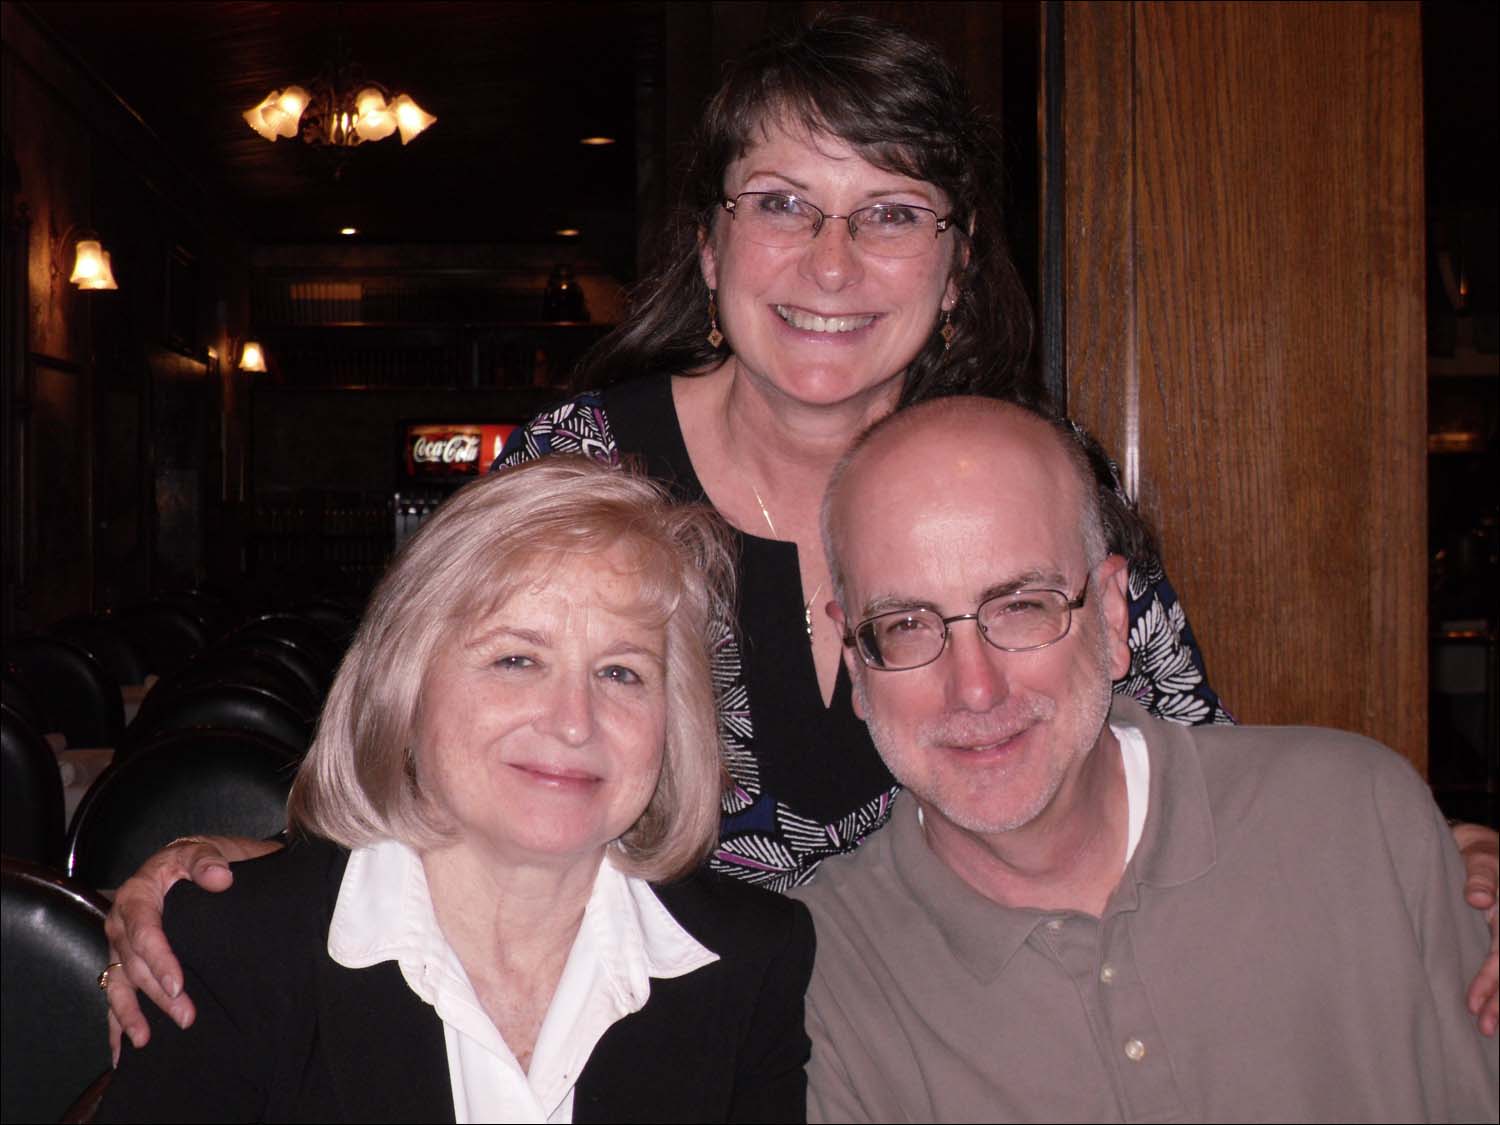 Dinner at The Depot, Colorado Springs, CO-Kath, cousin John and Ginny (wife)